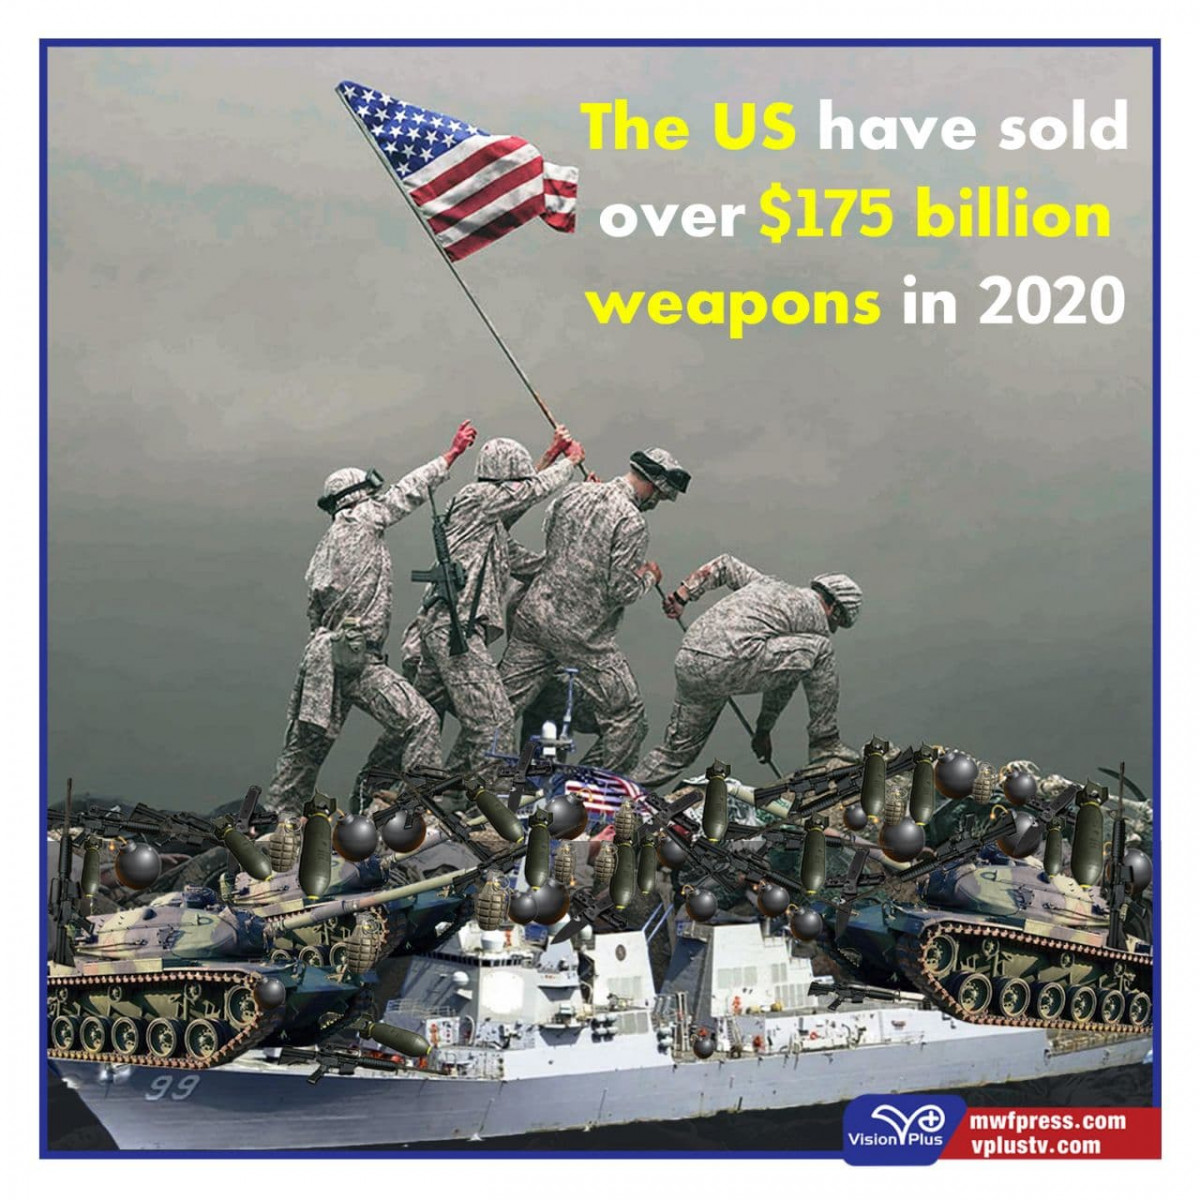 The US have sold over $175 billion weapons in 2020